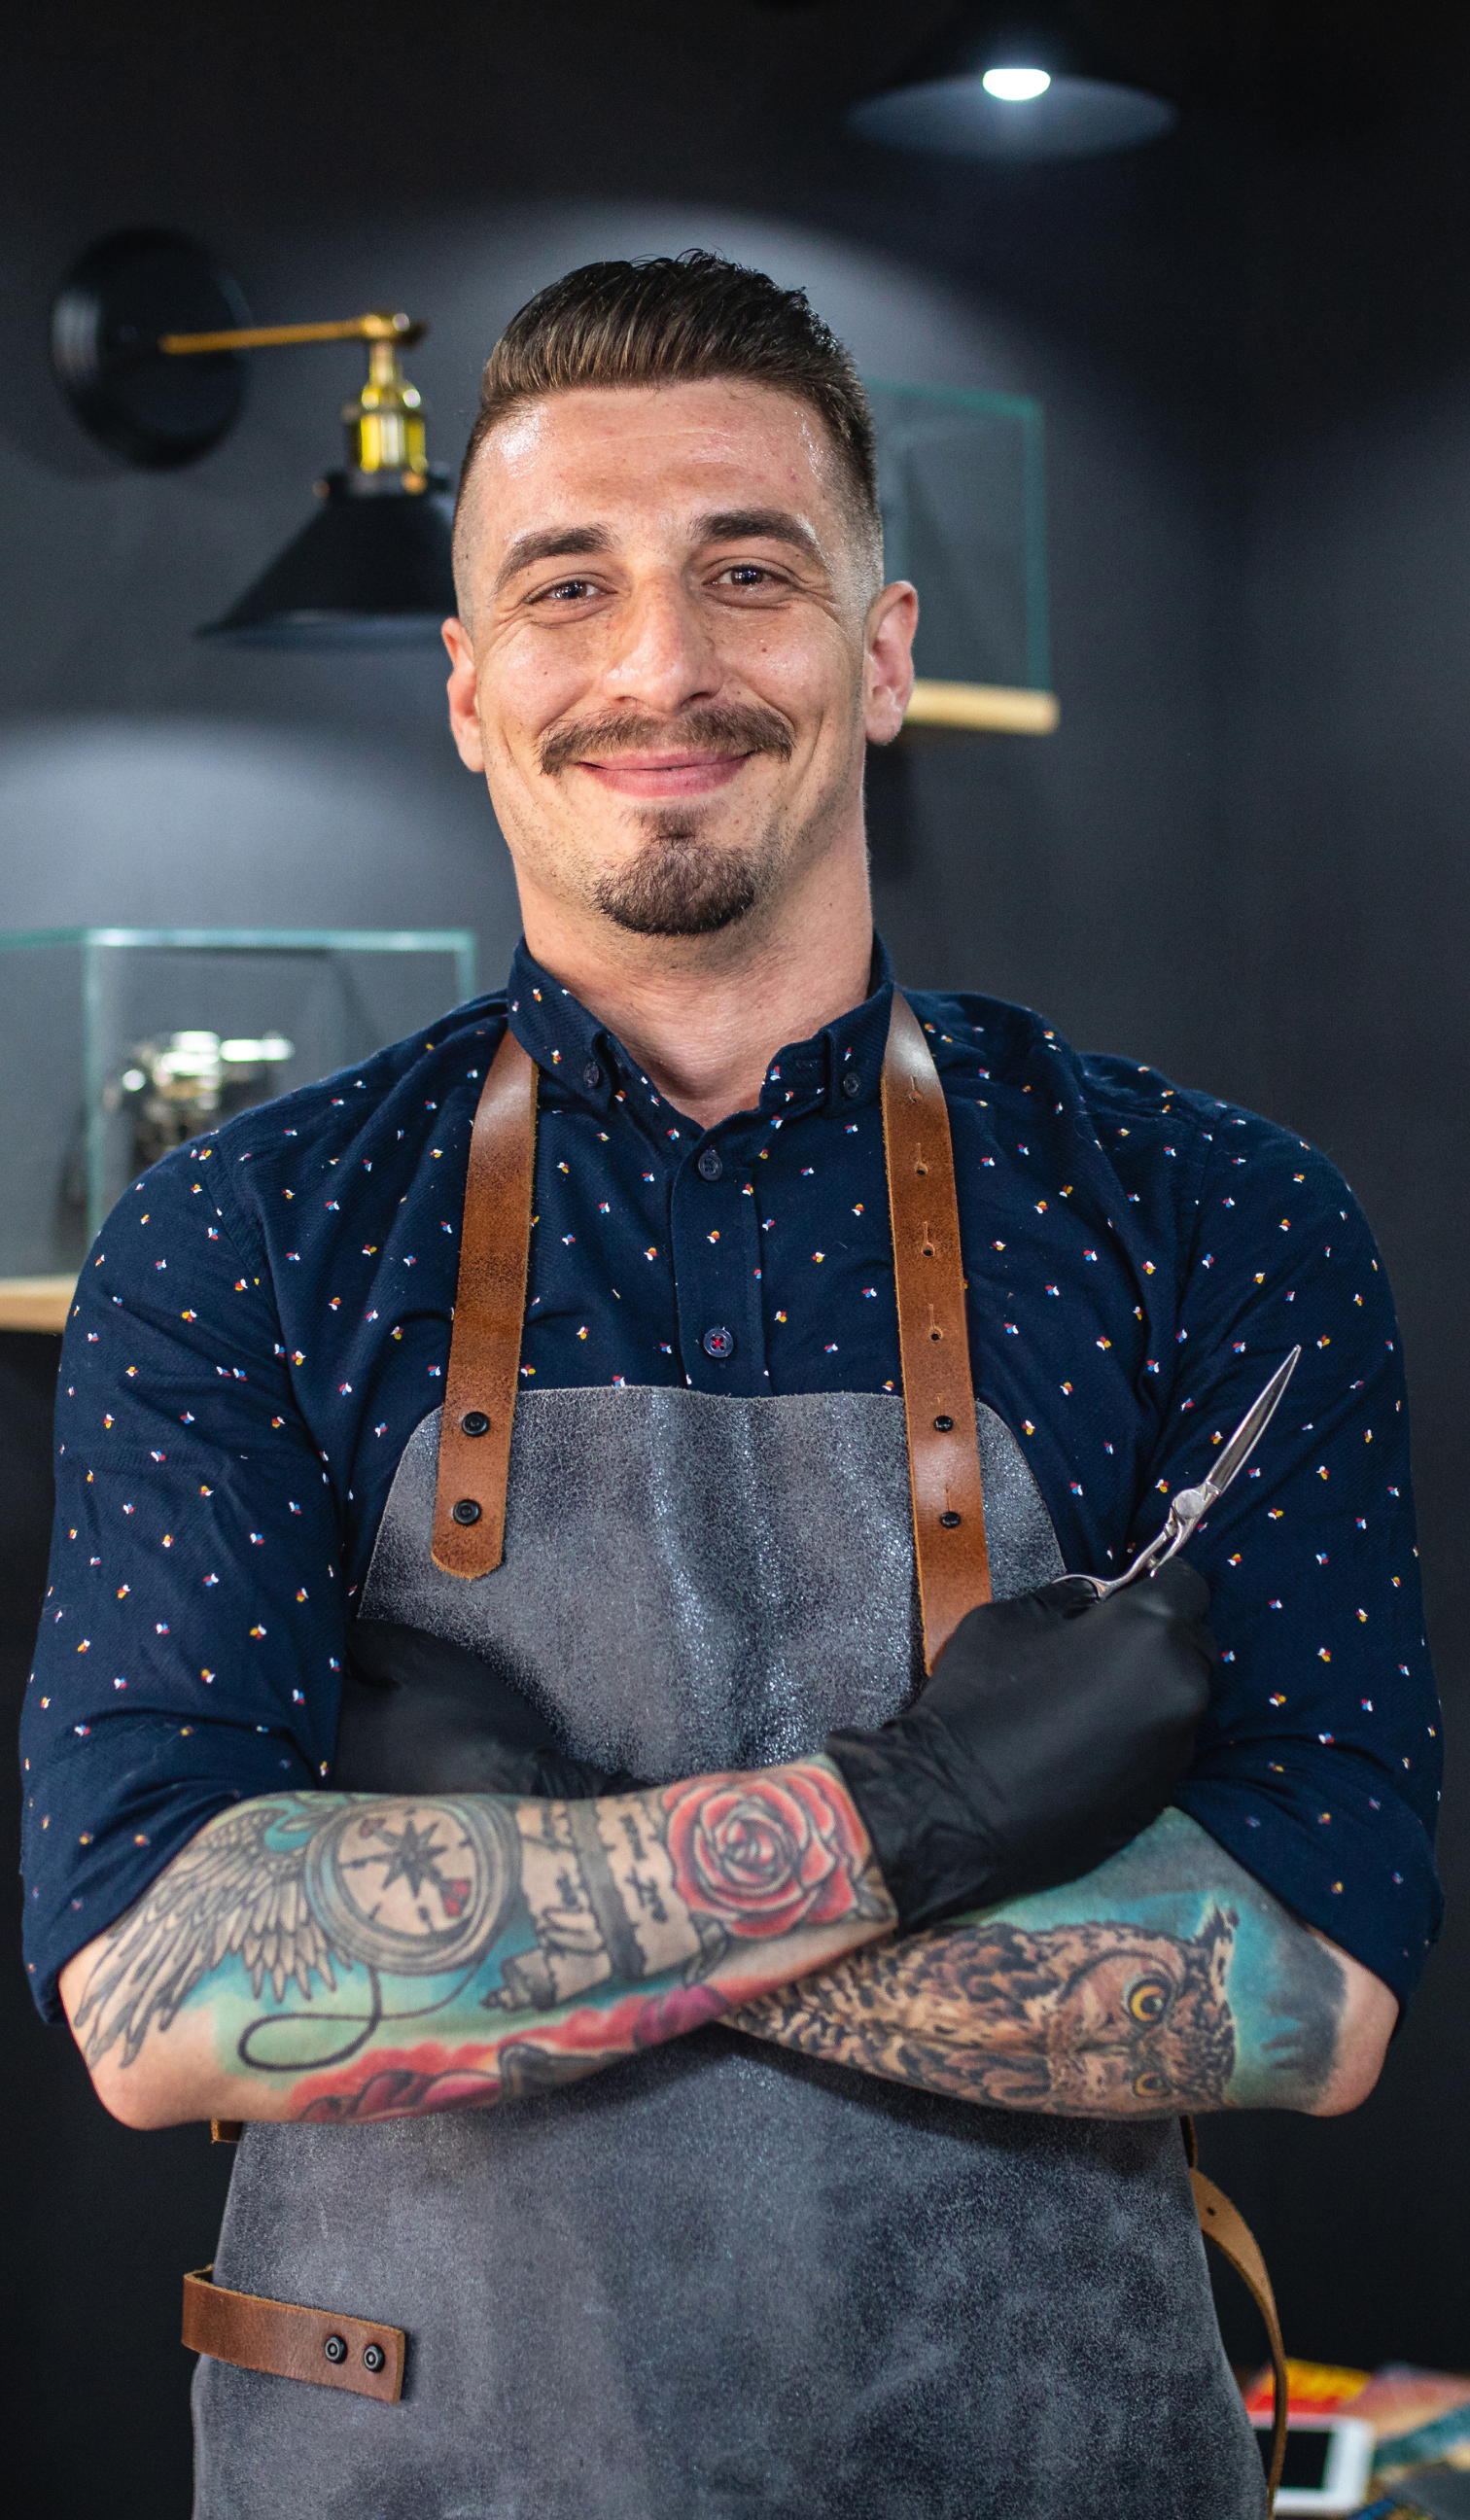 a barber wearing an apron and black gloves is standing with his arms crossed in a barber shop .